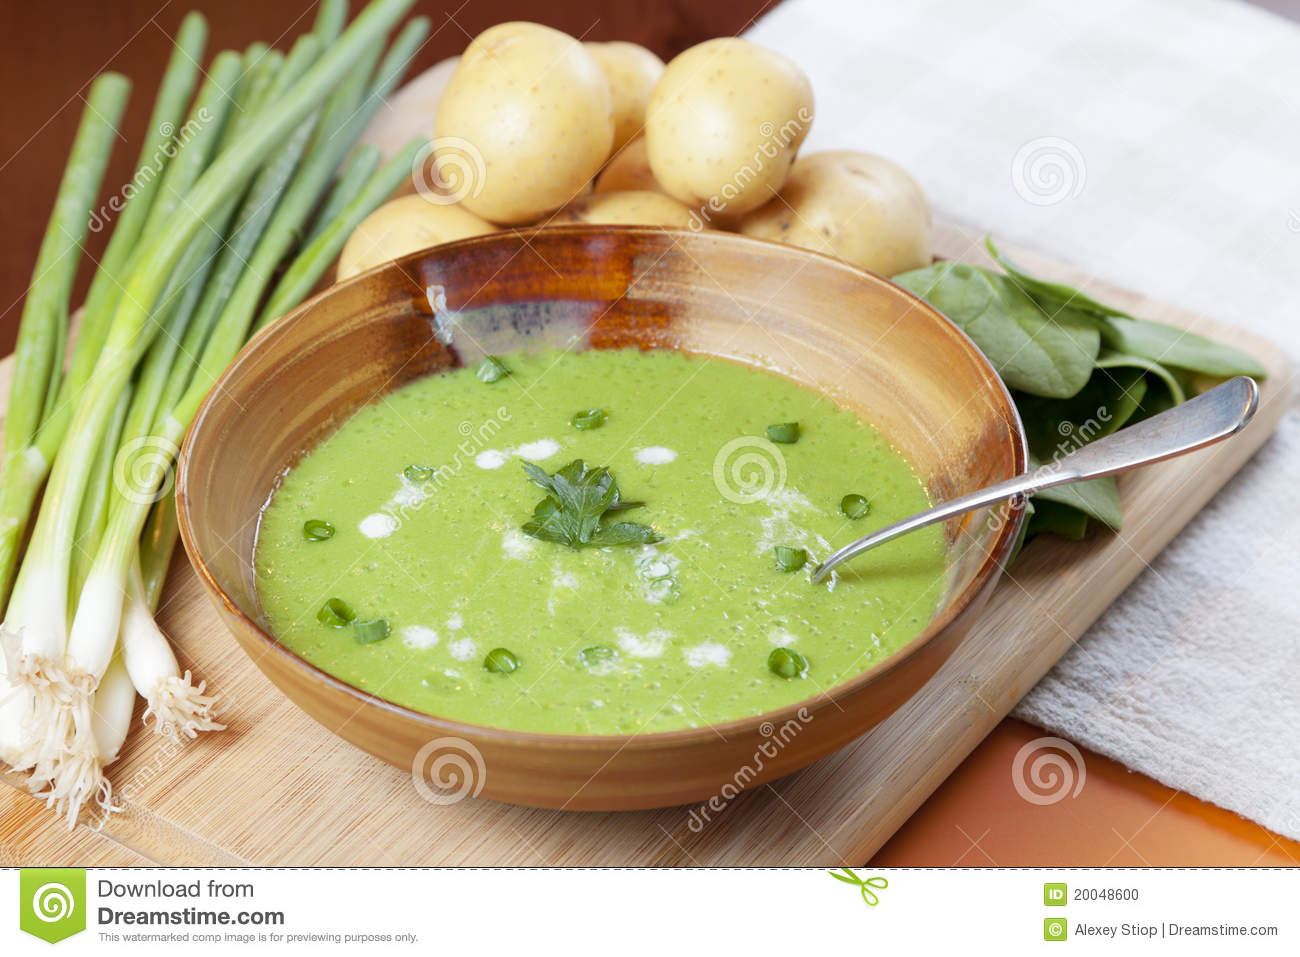 Homemade Soup Surrounded By Fresh Ingredients